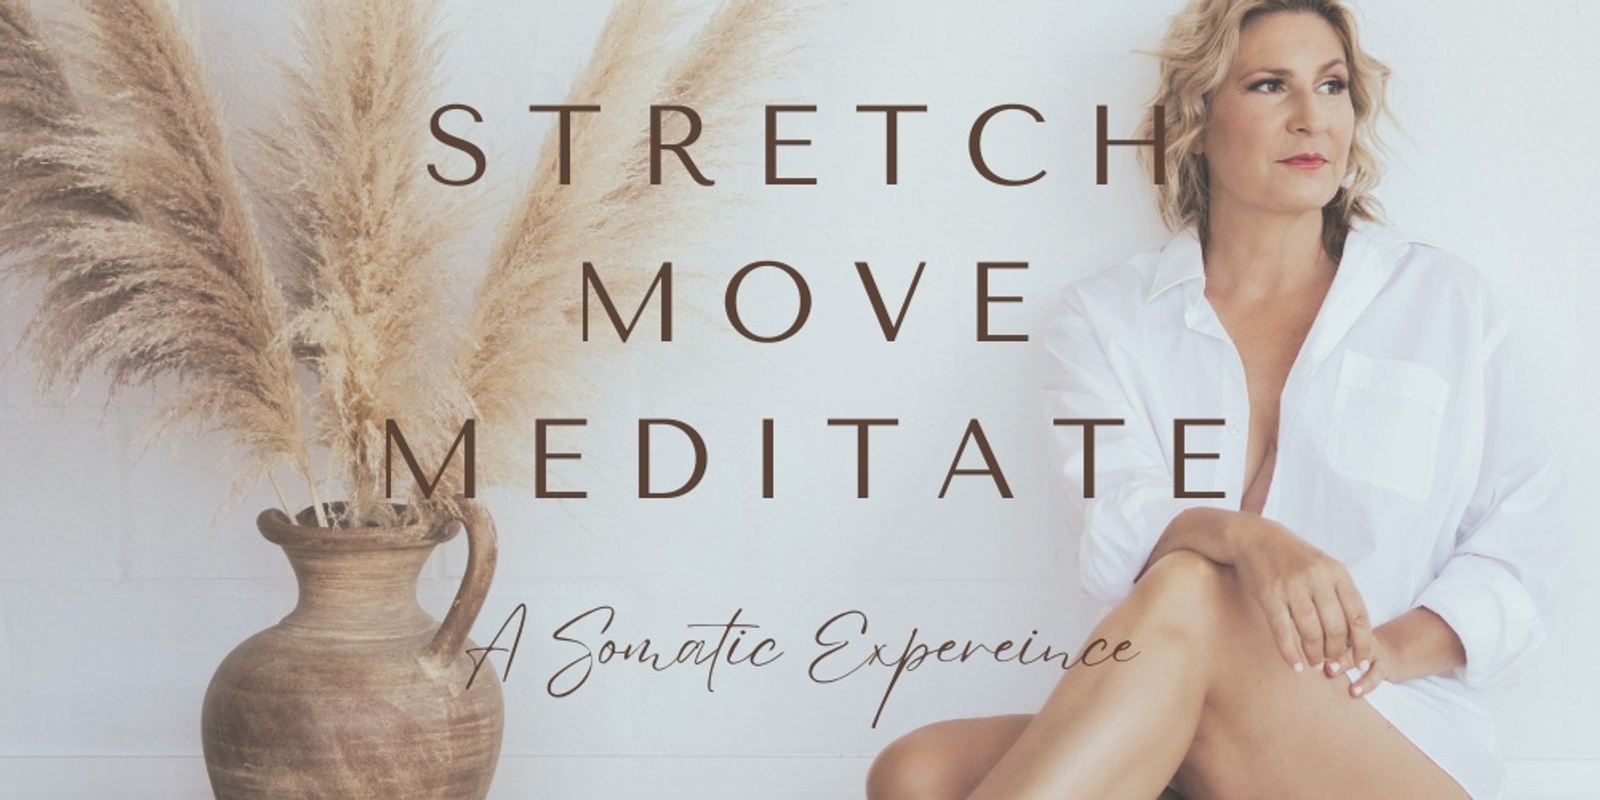 Stretch Move Meditate - A Somatic Experience